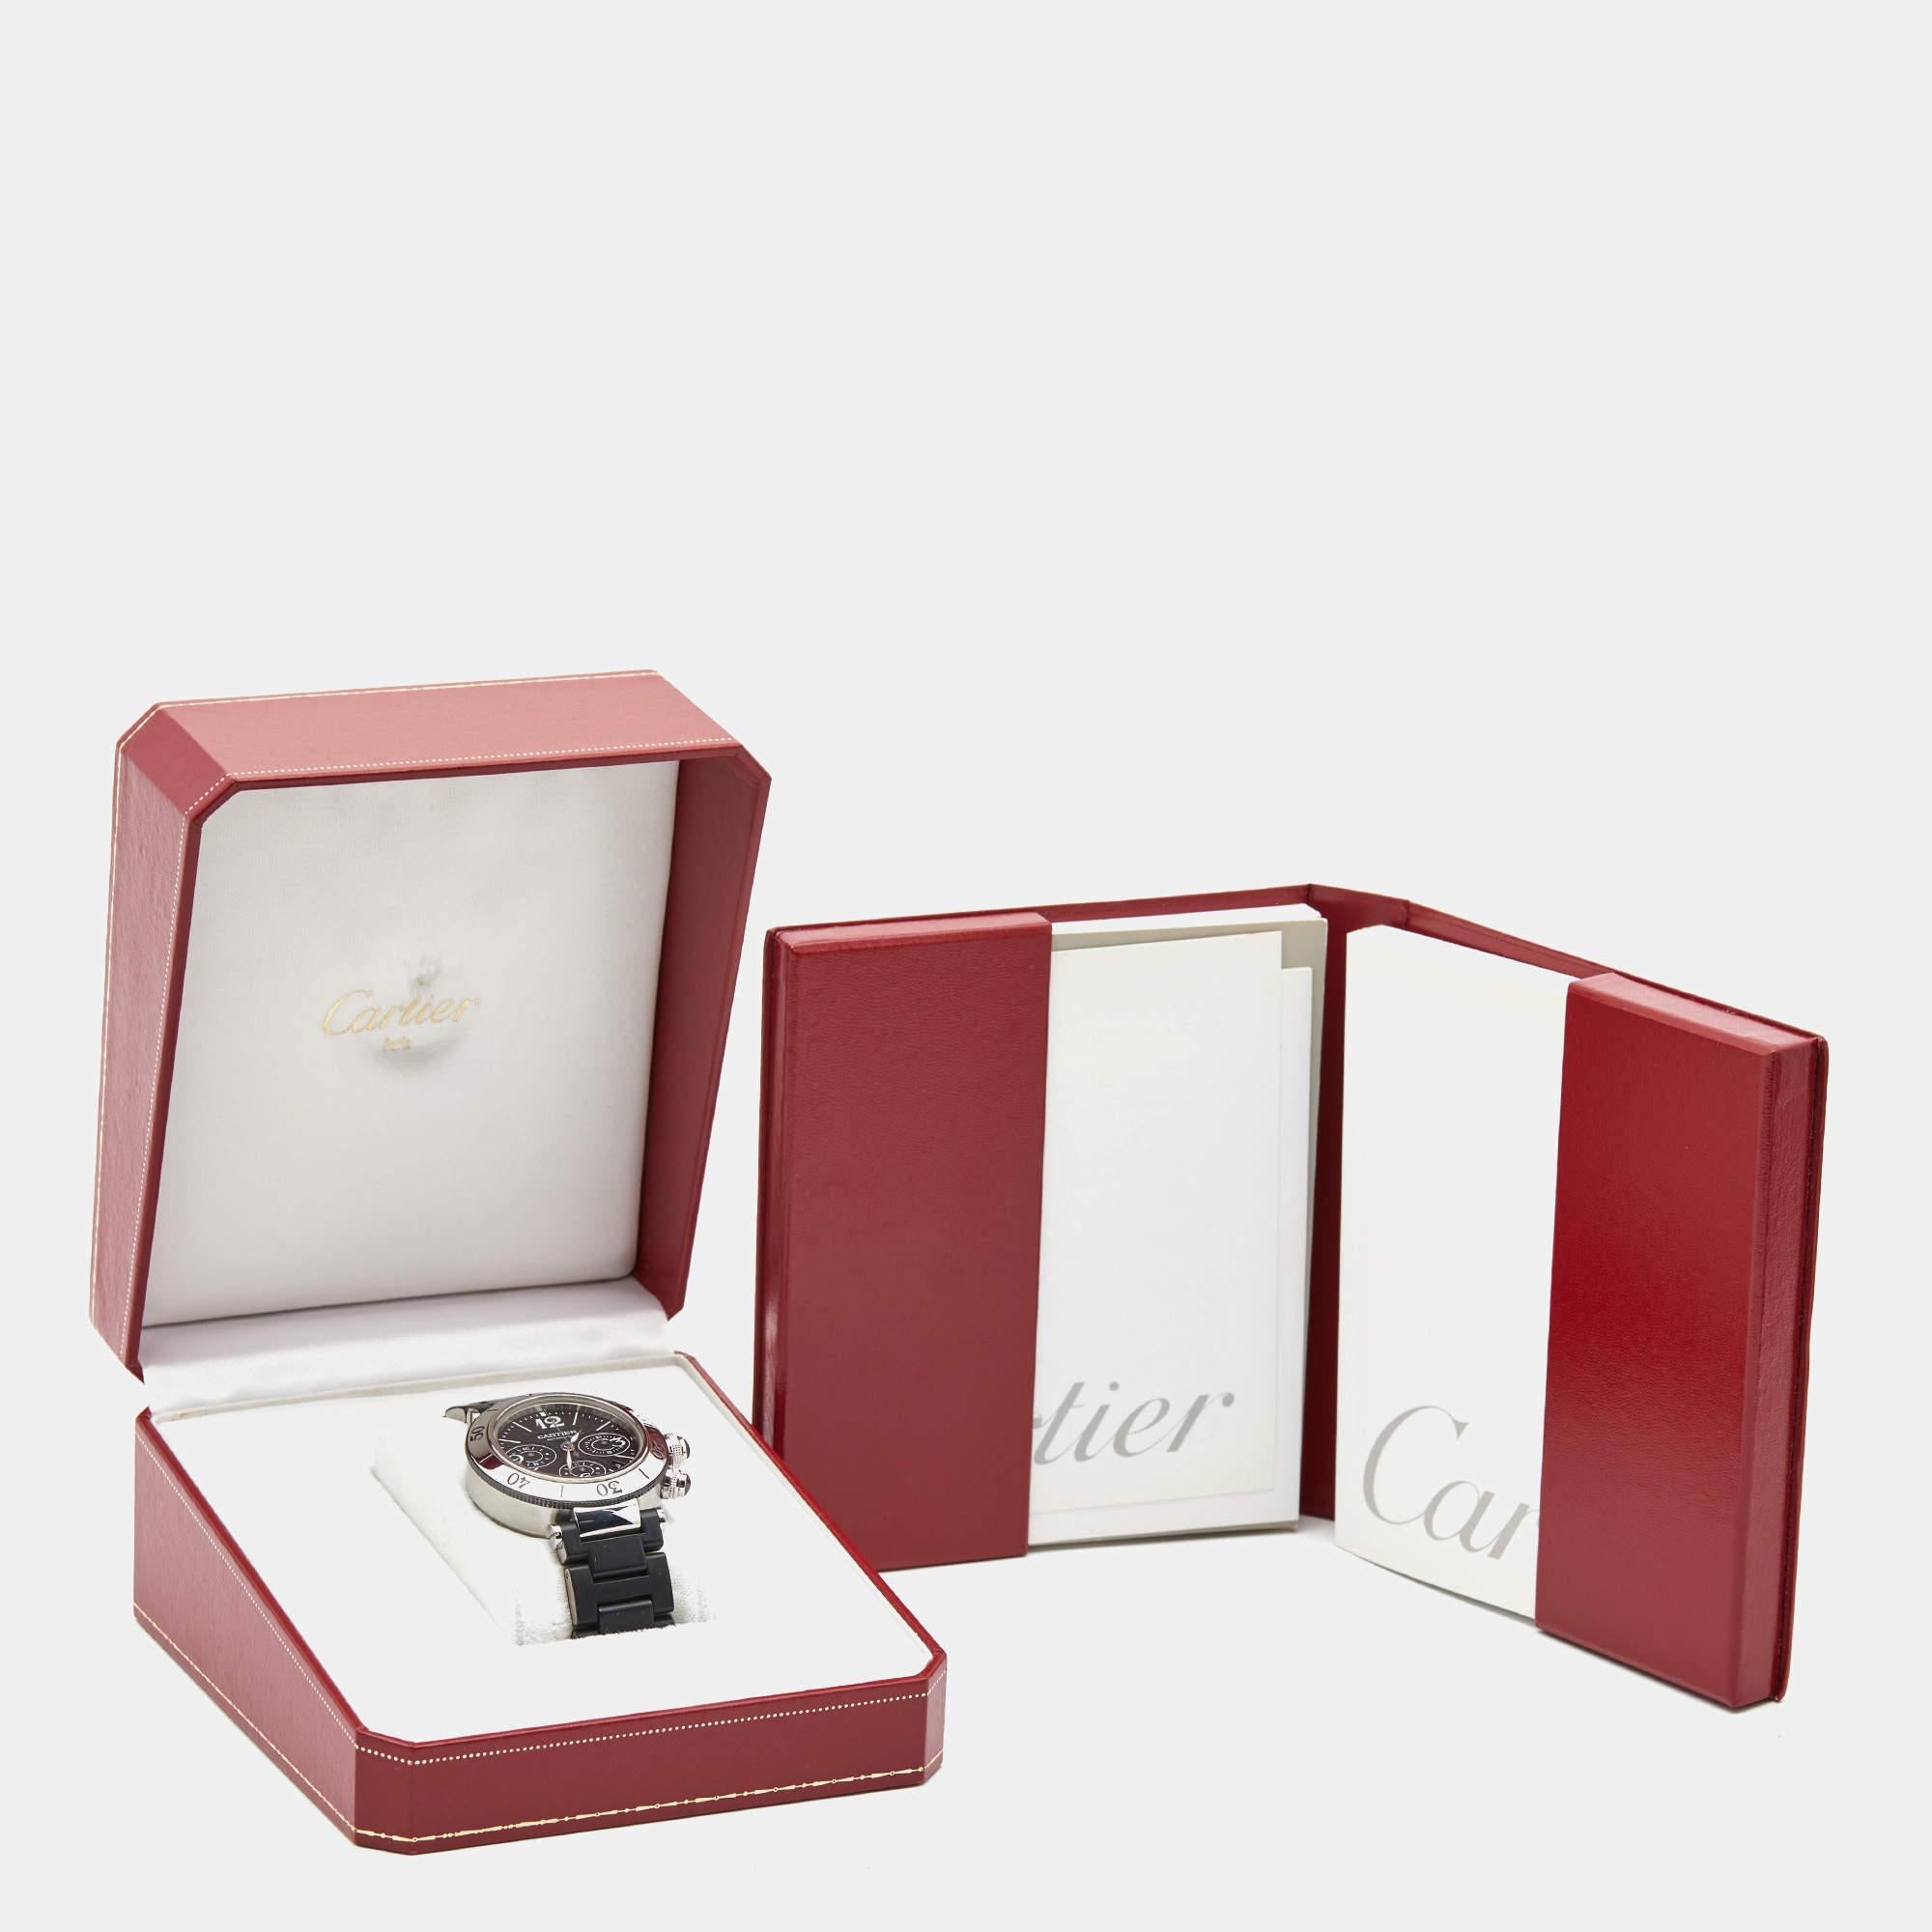 Let this fine Pasha Seatimer wristwatch by Cartier accompany you with ease and luxurious style. Beautifully crafted using the best quality materials, the automatic watch is built to be durable and functional. It has a stainless steel case held by a